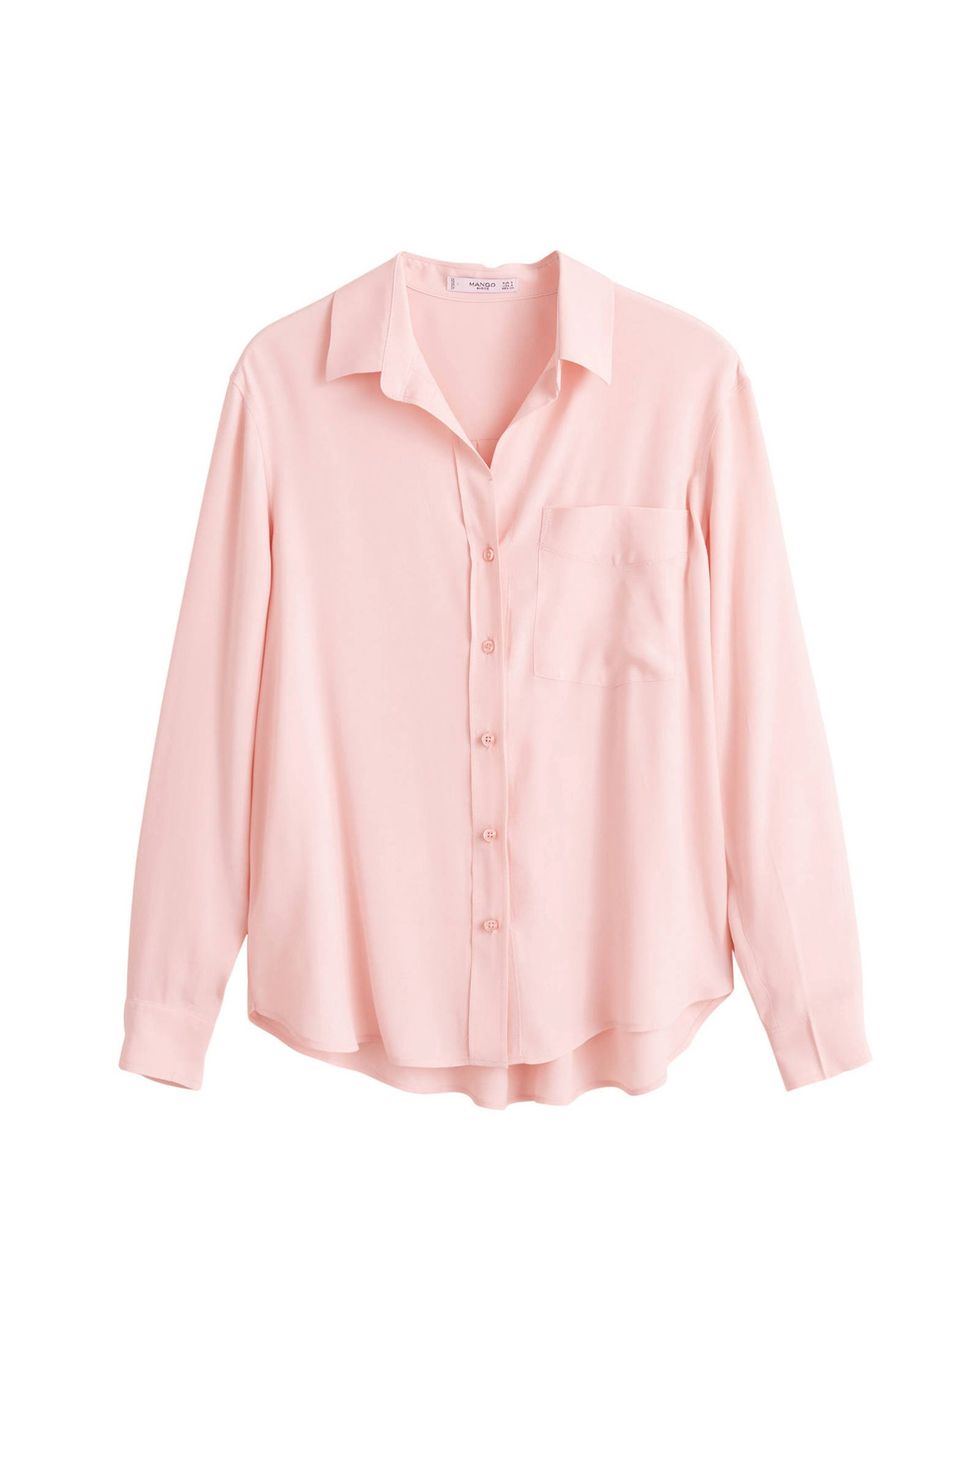 Clothing, Pink, Sleeve, Collar, Shirt, Blouse, Neck, Outerwear, Peach, Top, 